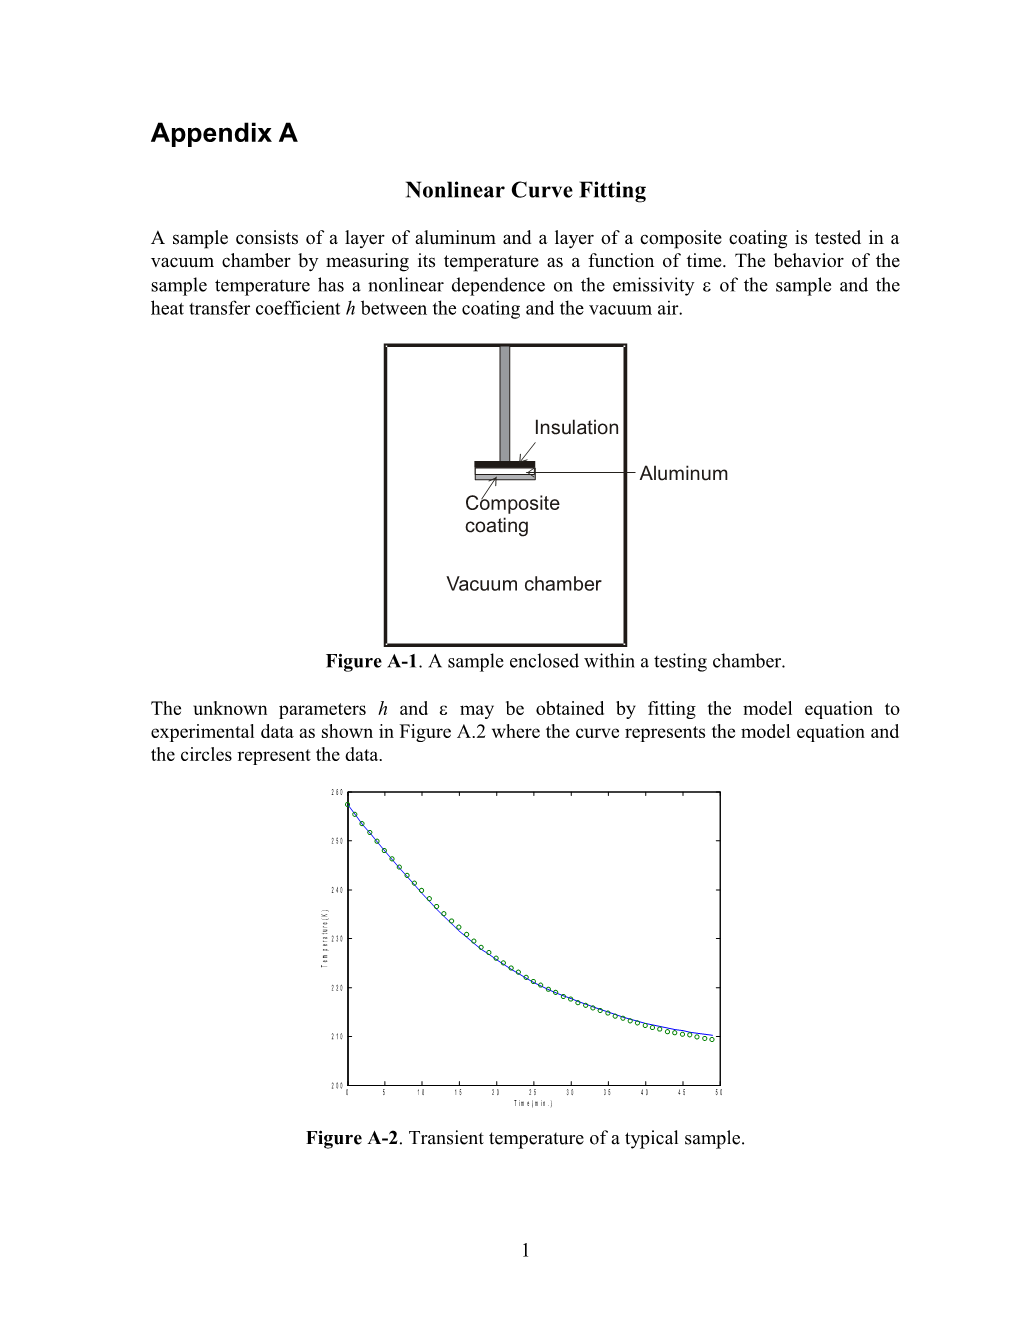 Nonlinear Curve Fitting